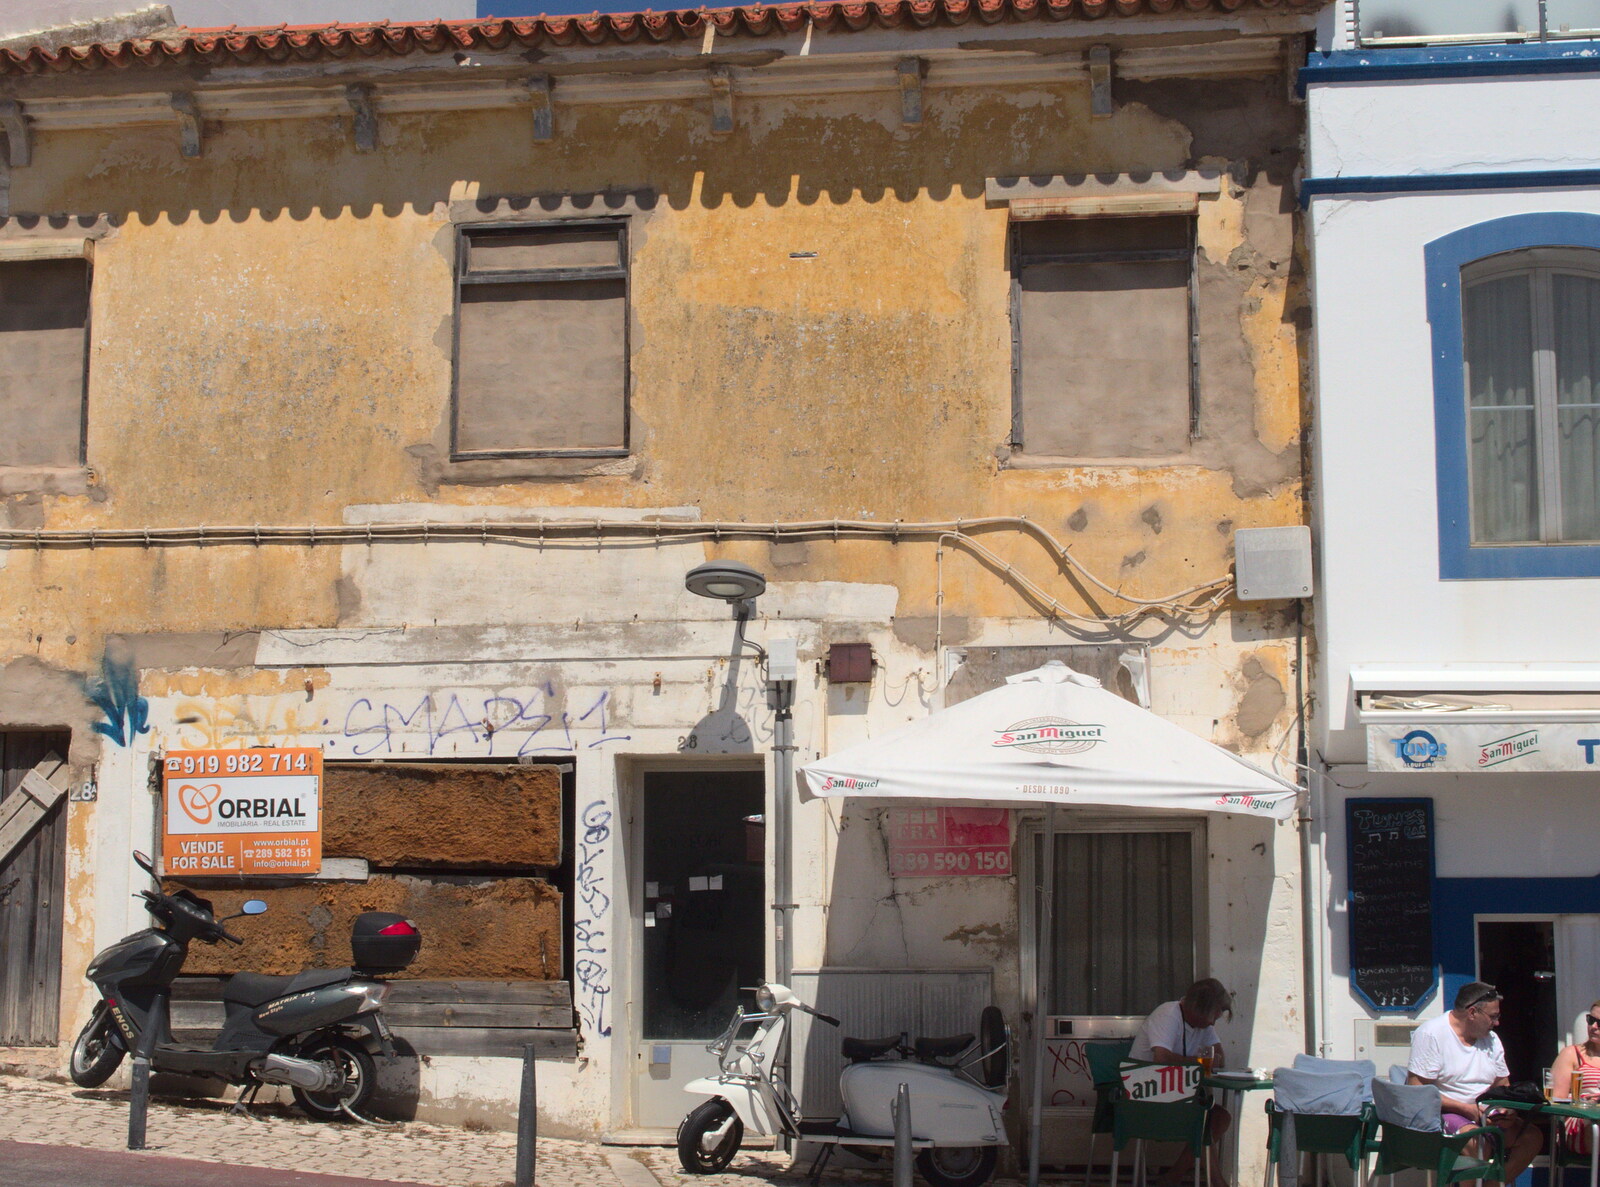 Derelict building from Gary and Vanessa's Barbeque, Alcantarilha, Algarve, Portugal - 7th April 2016